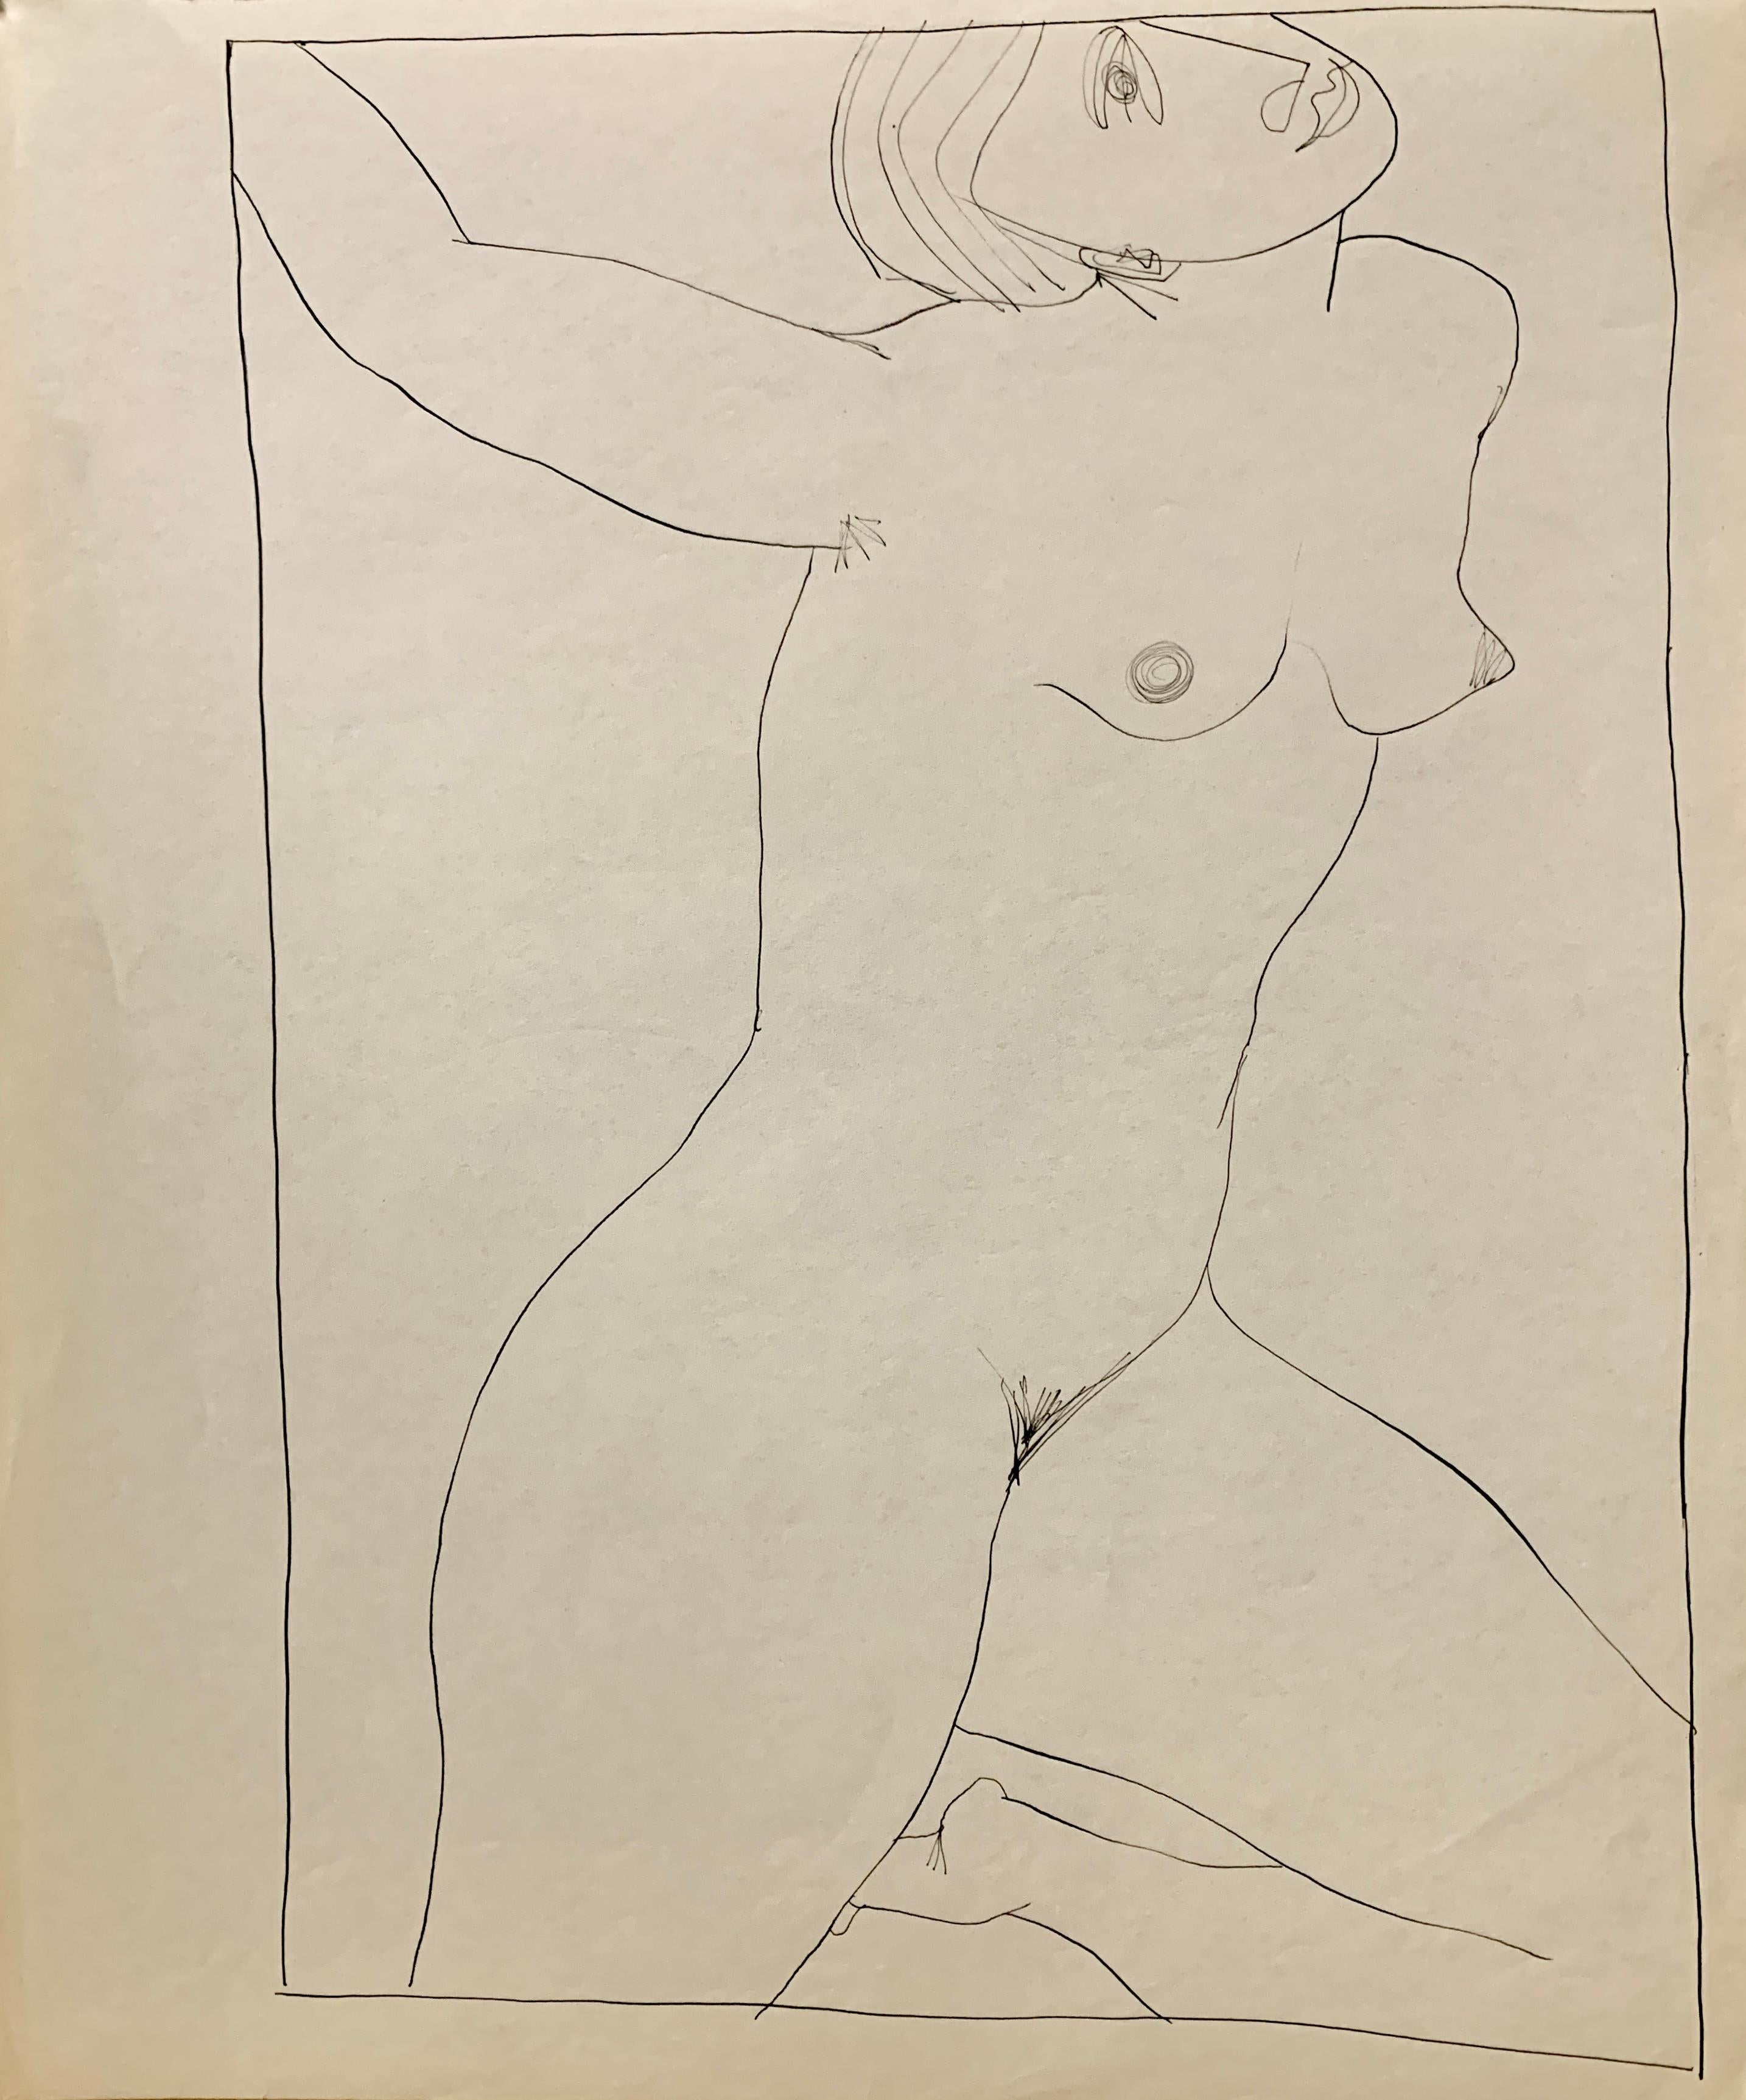 Donald Stacy Nude - 1950s "Looking Up" Mid Century Figurative Ink New York Artist